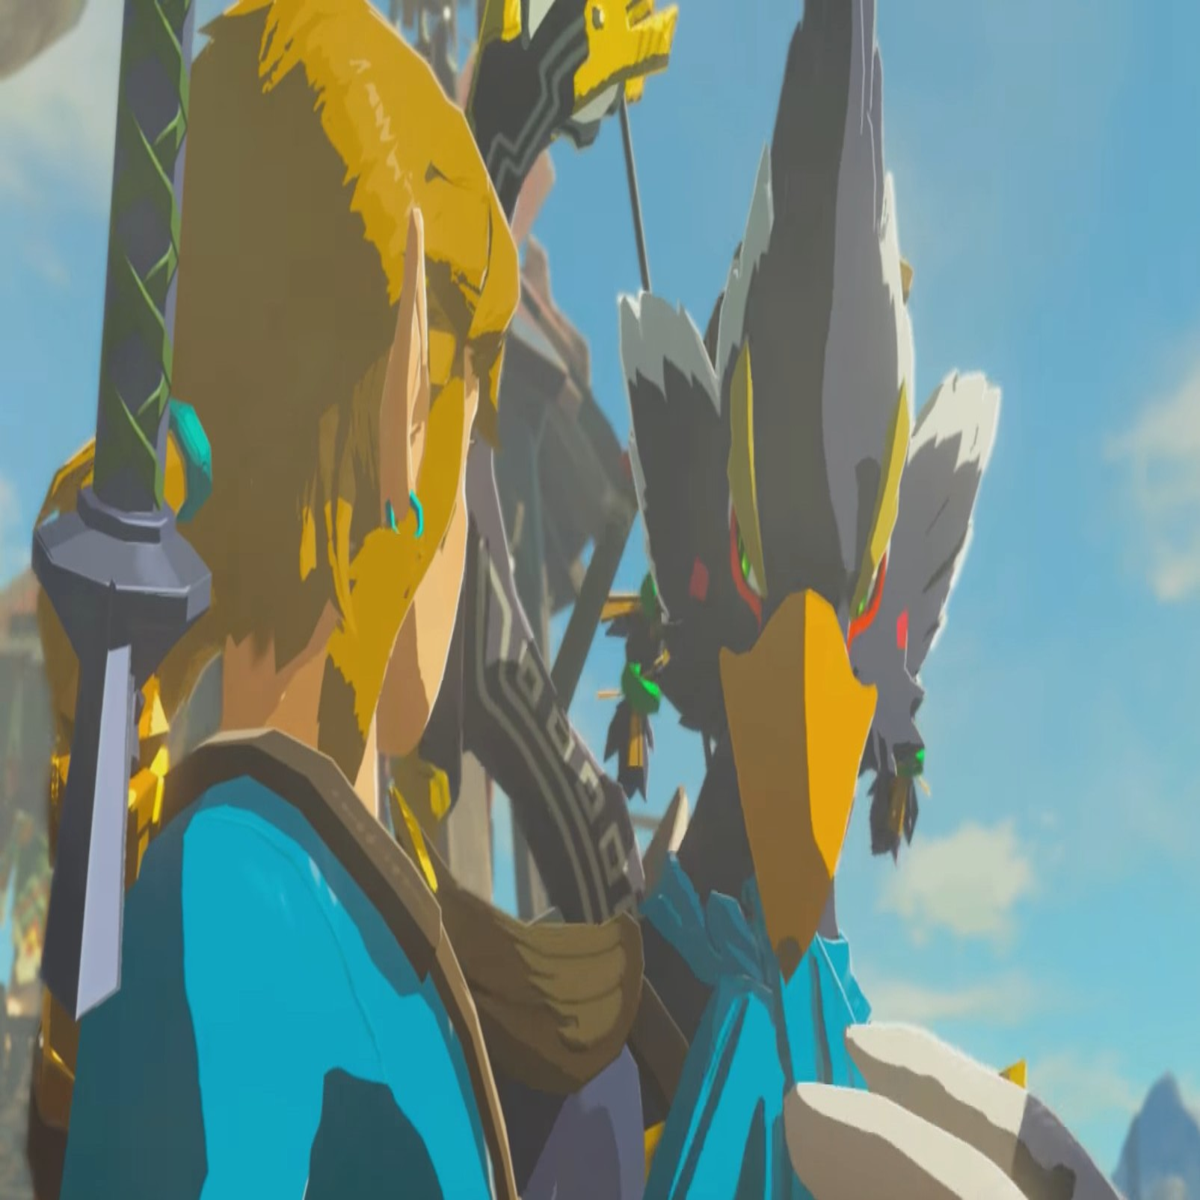 Mods at The Legend of Zelda: Breath of the Wild - Mods and community